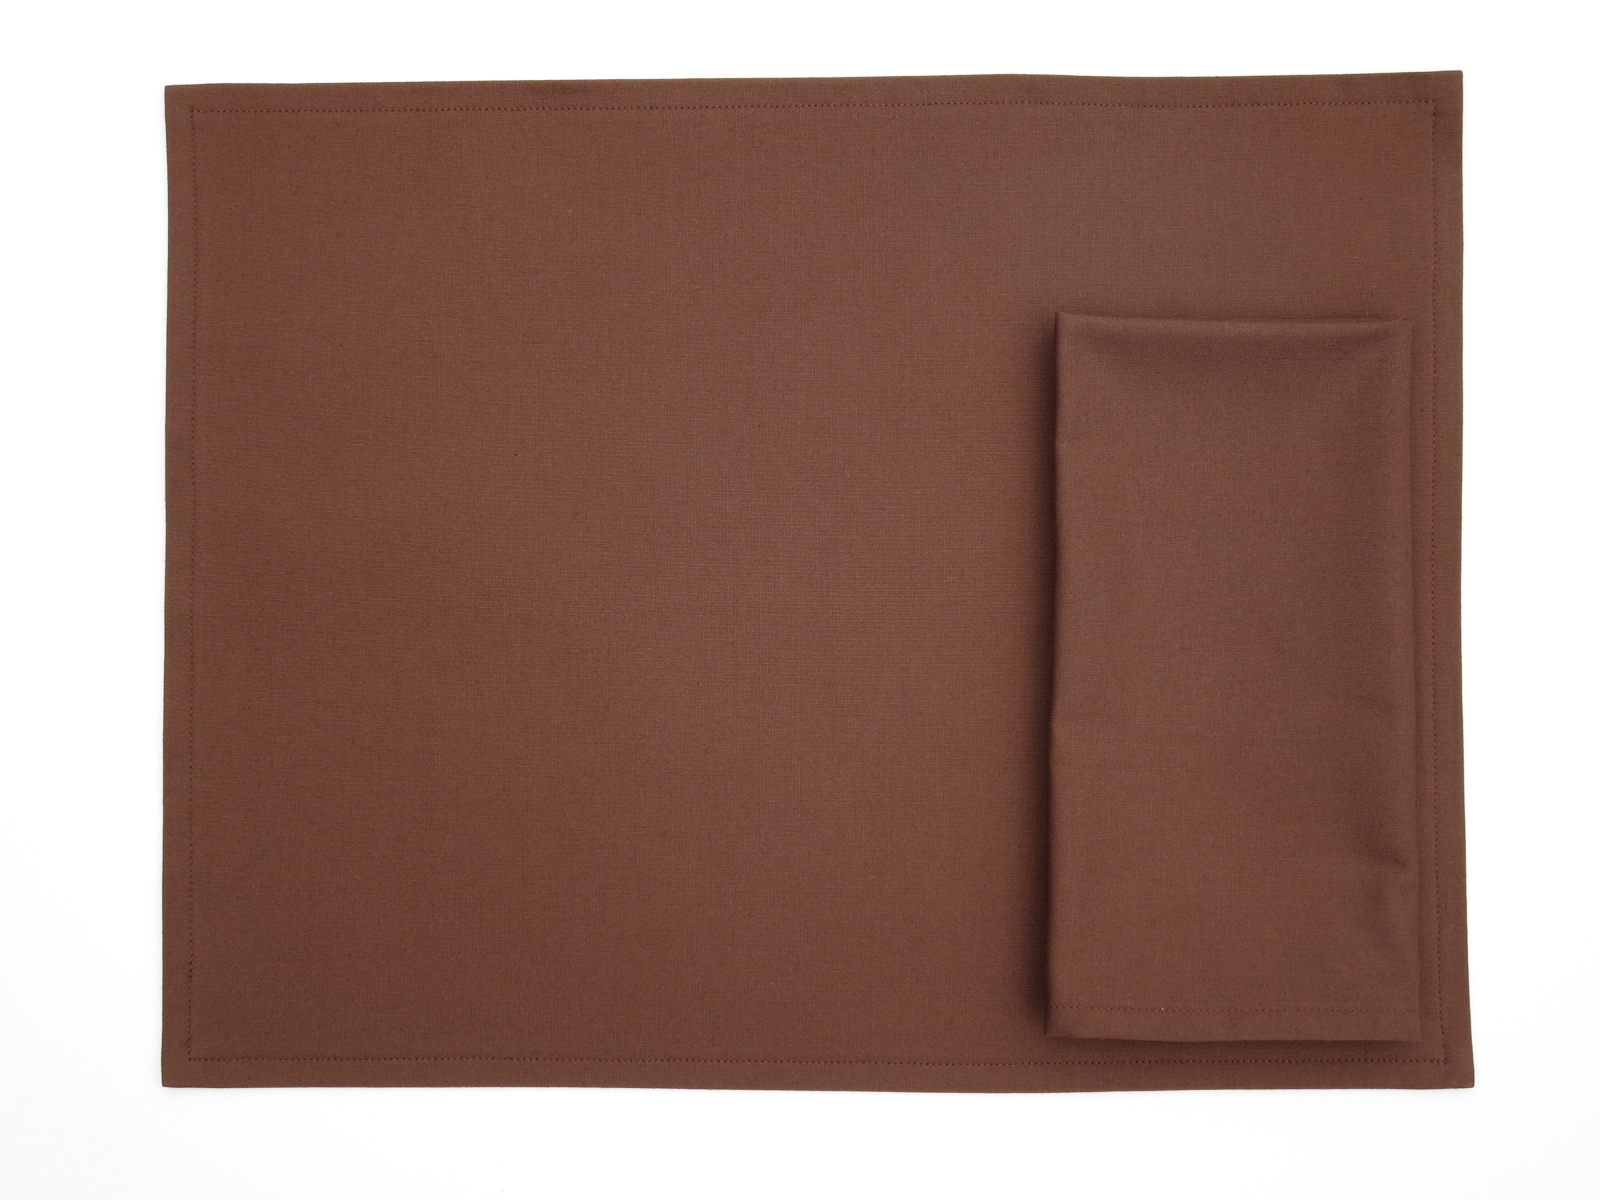 Solid Brown, Beige or Tan Placemats with Optional Matching Napkins ...